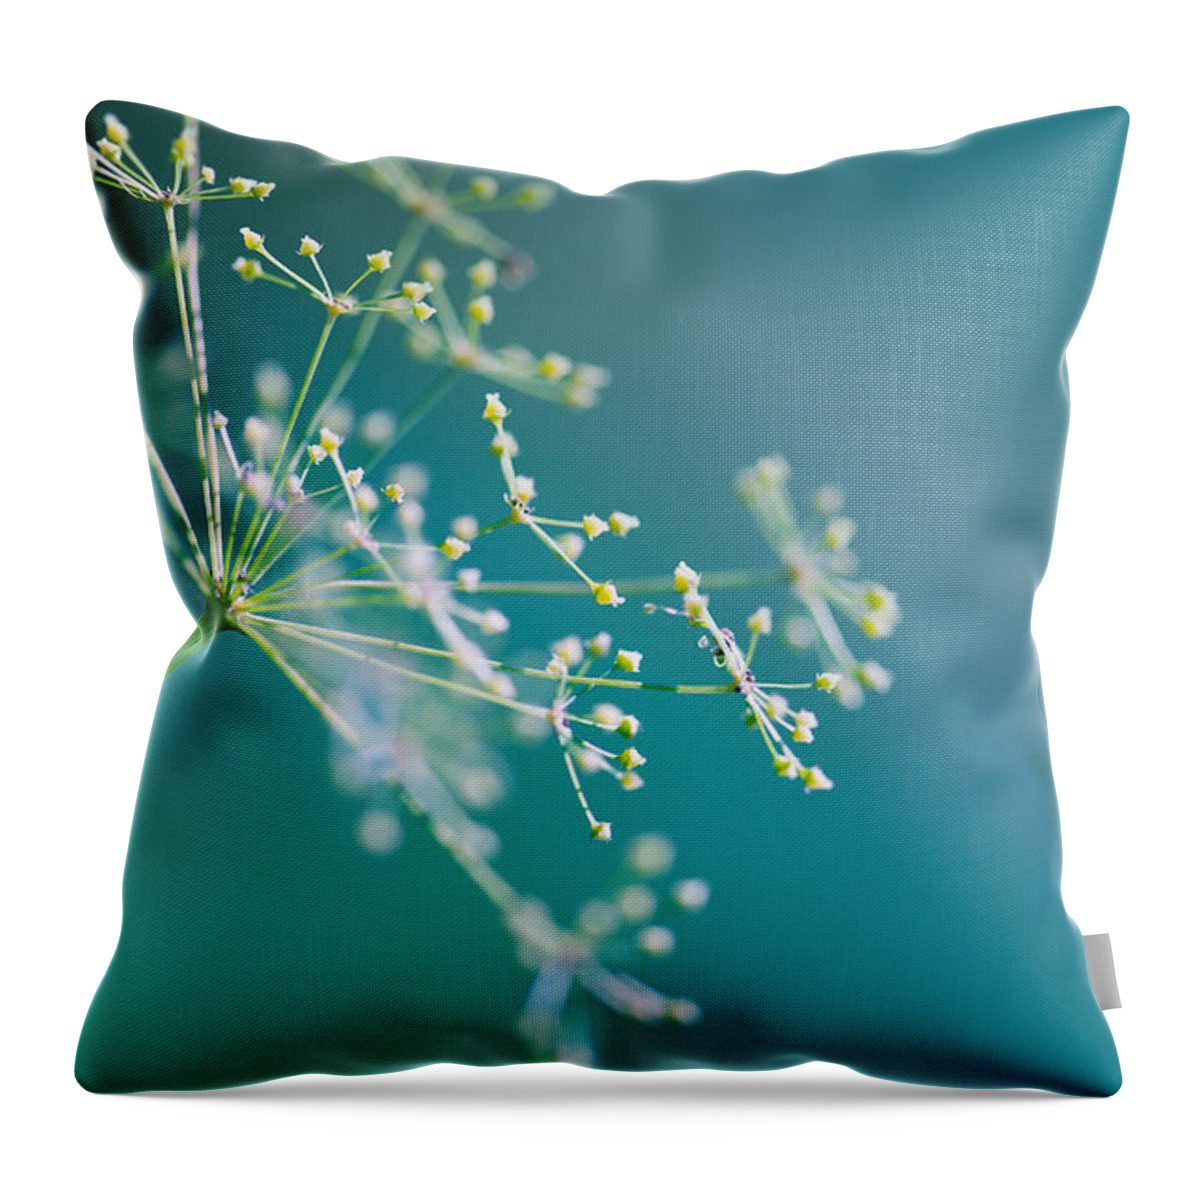 Dill Throw Pillow featuring the photograph Fragile Dill Umbels by Nailia Schwarz